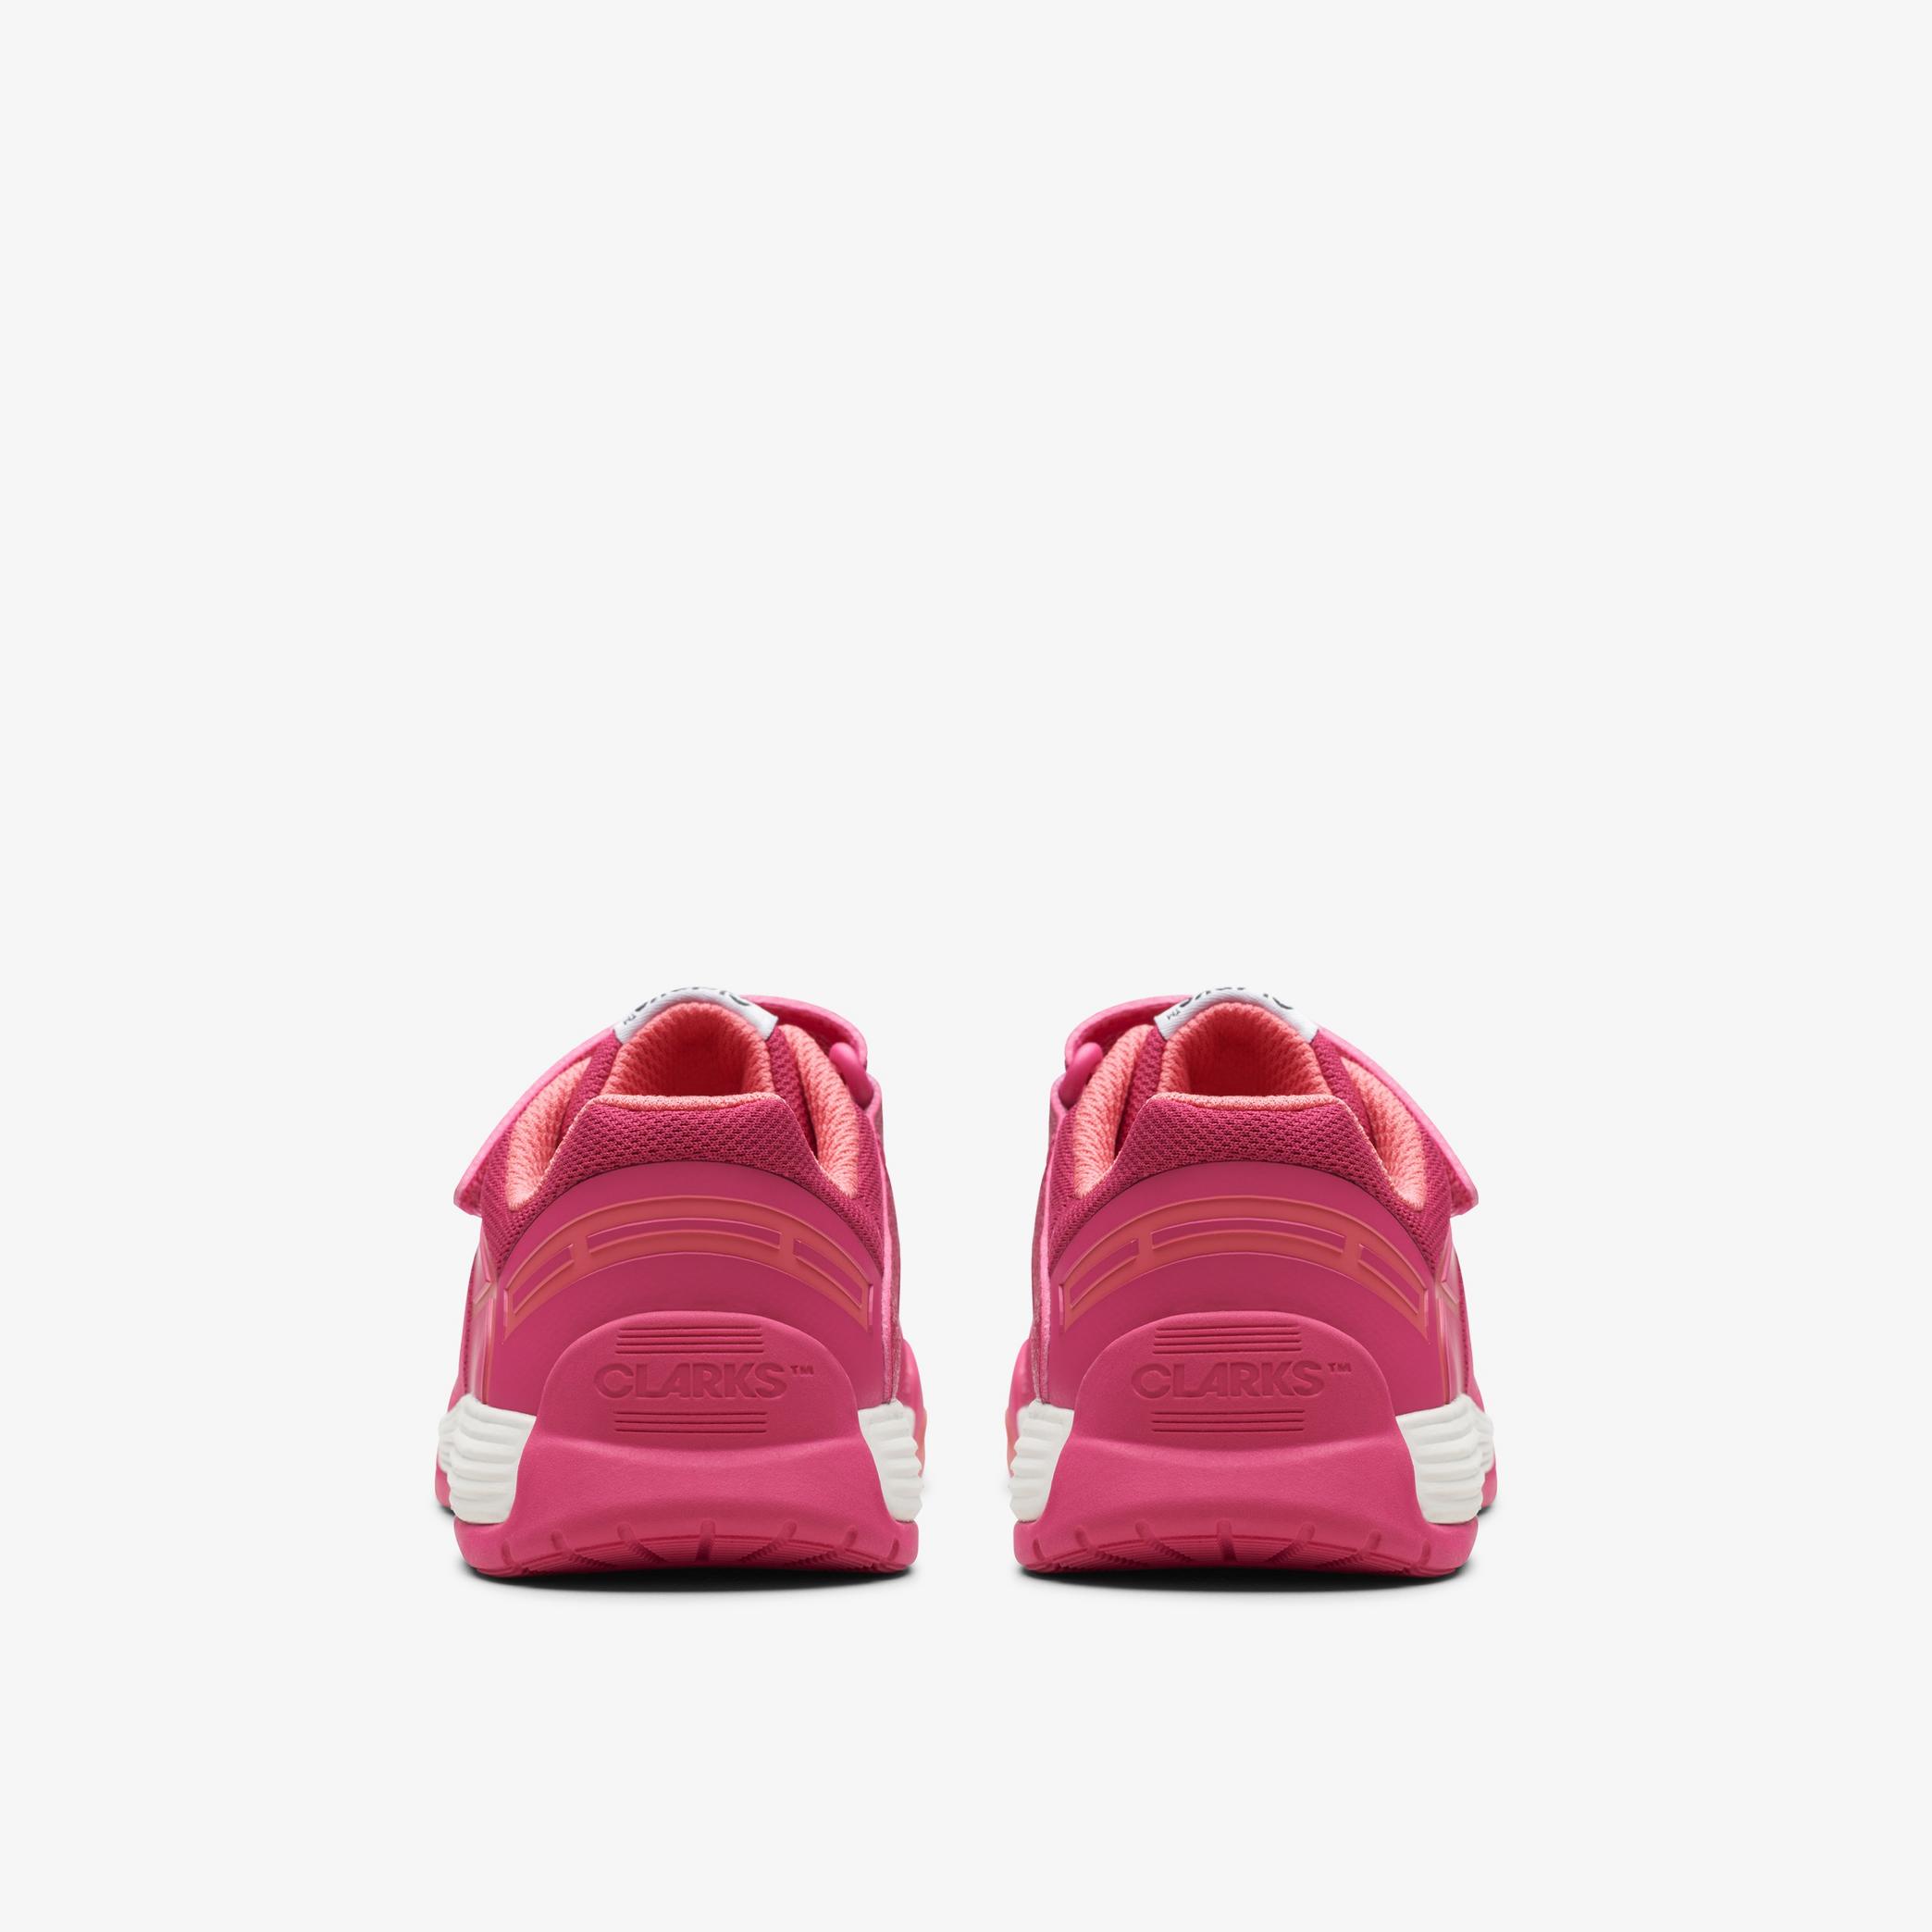 Girls CICA Star Flex Kid Pink Combination Synthetic Trainers | Clarks UK